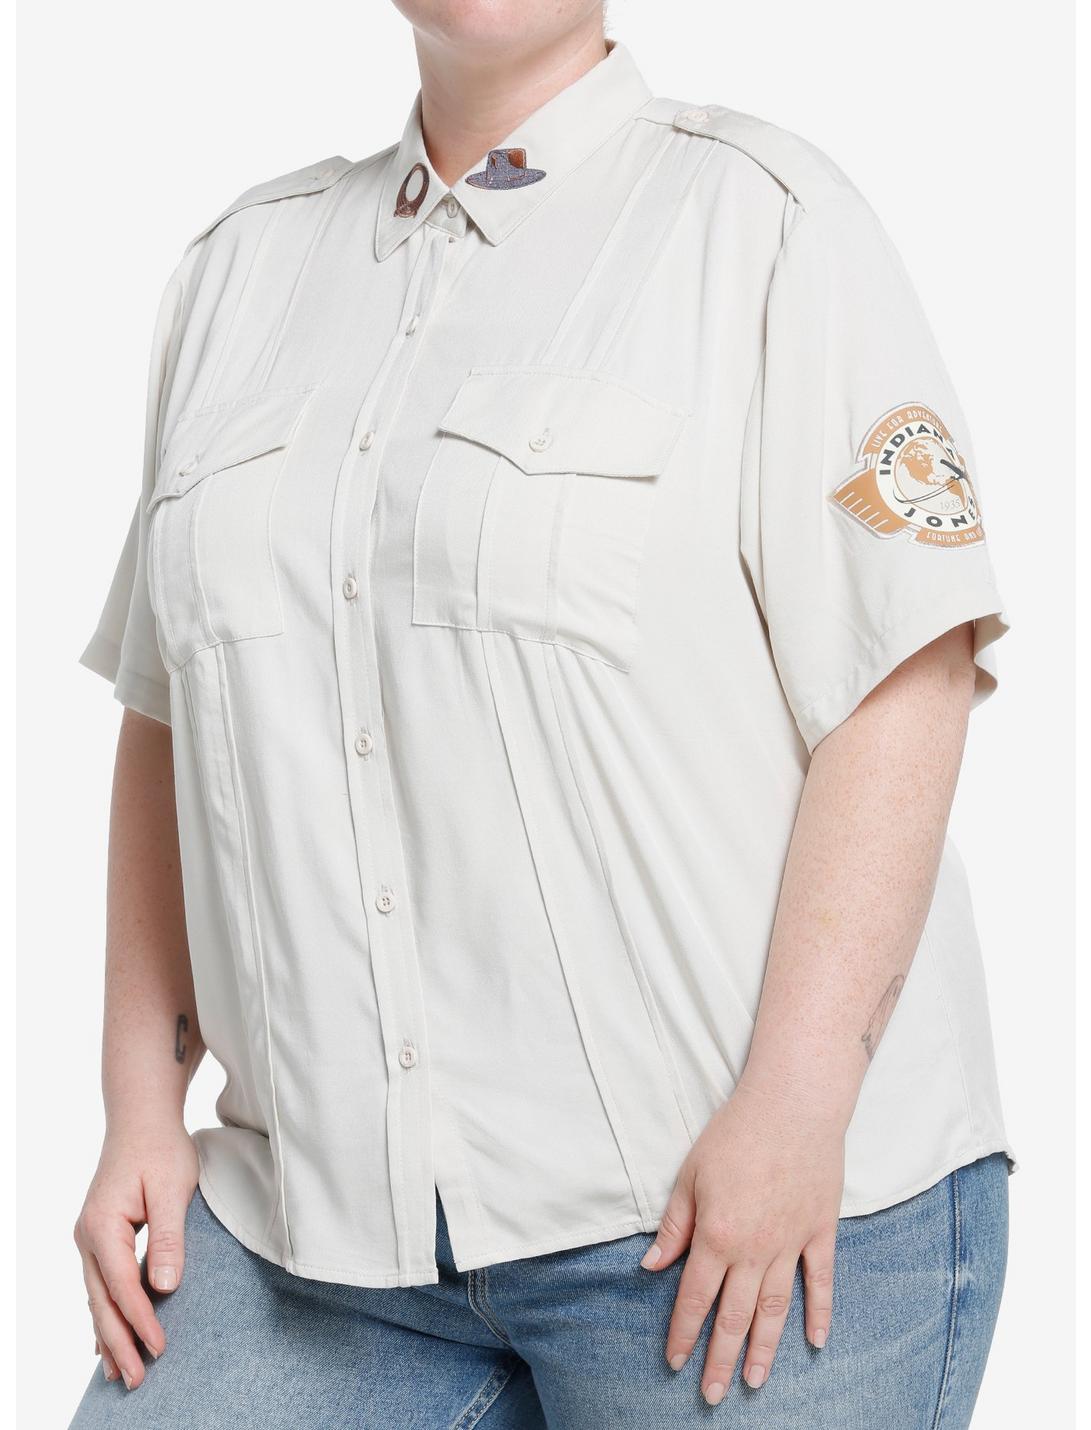 Her Universe Indiana Jones Expedition Girls Woven Button-Up Plus Size, MULTI, hi-res